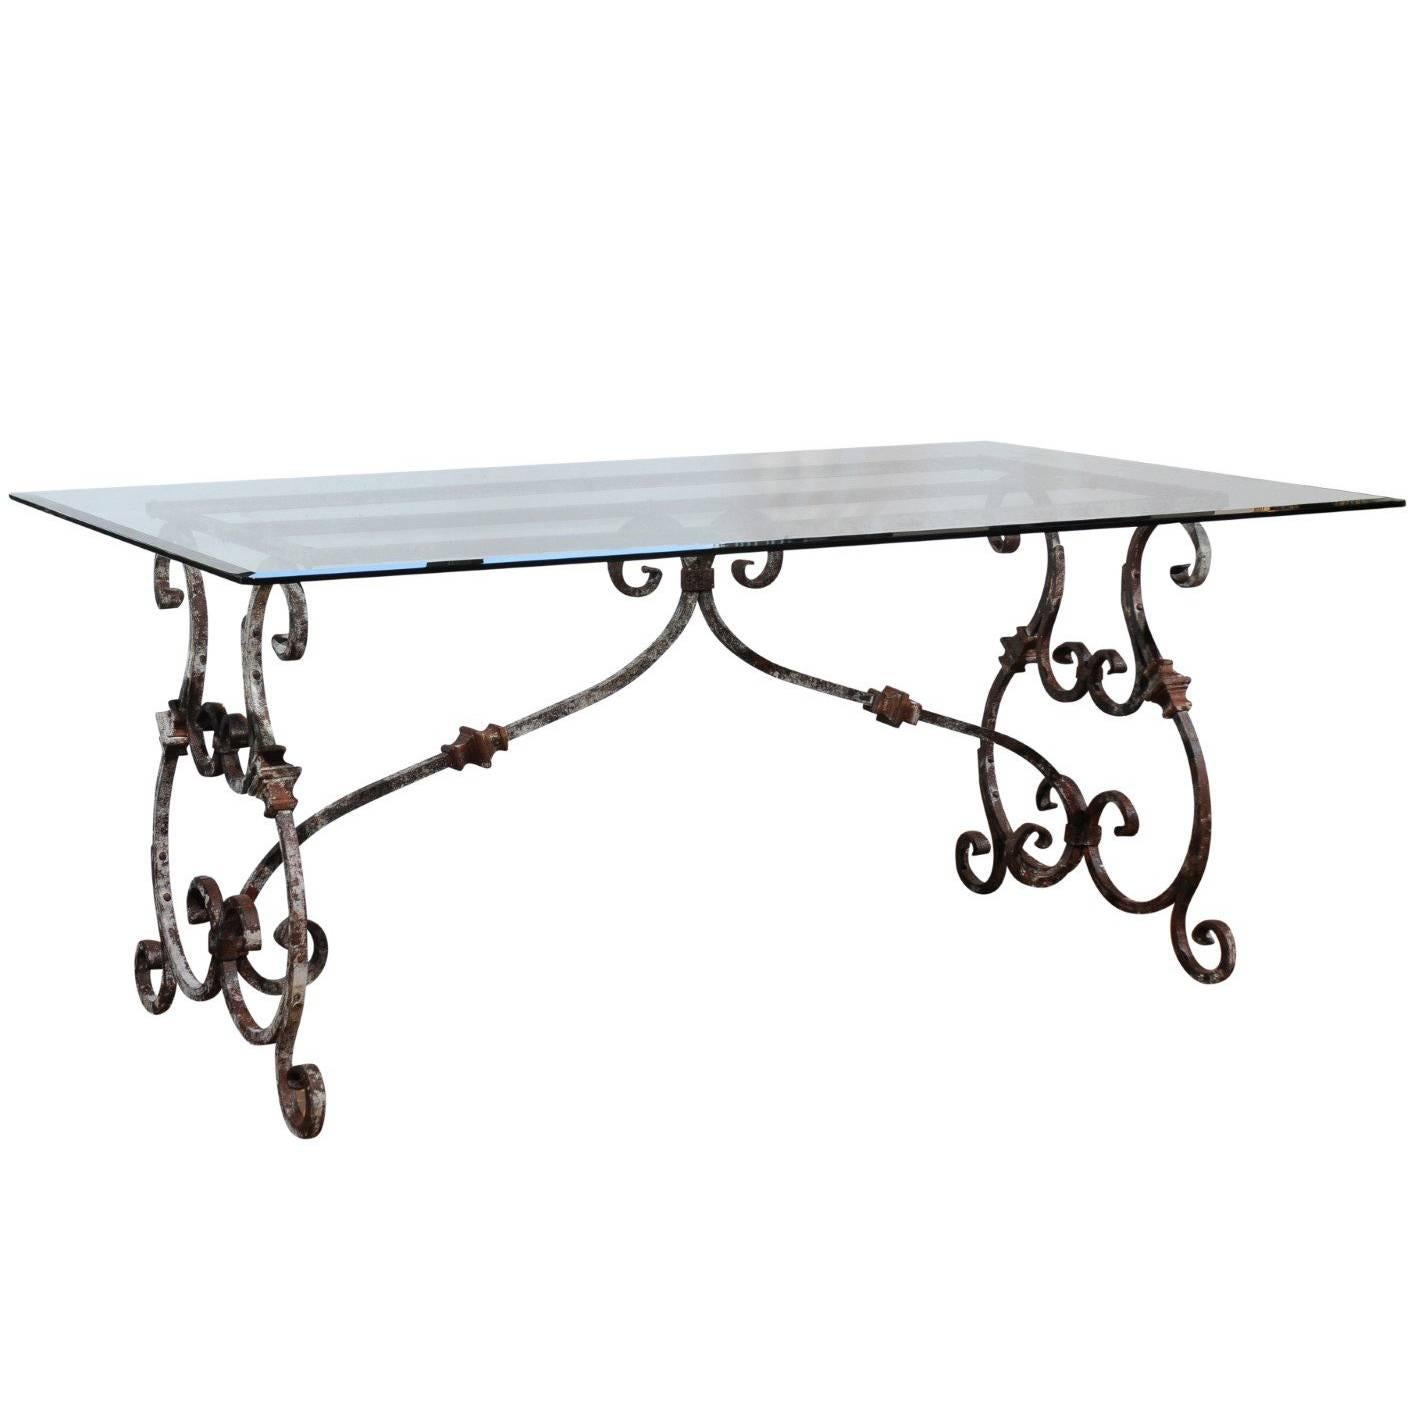 Italian Baroque Style Hand-Forged Iron Table Base with New Custom-Made Glass Top